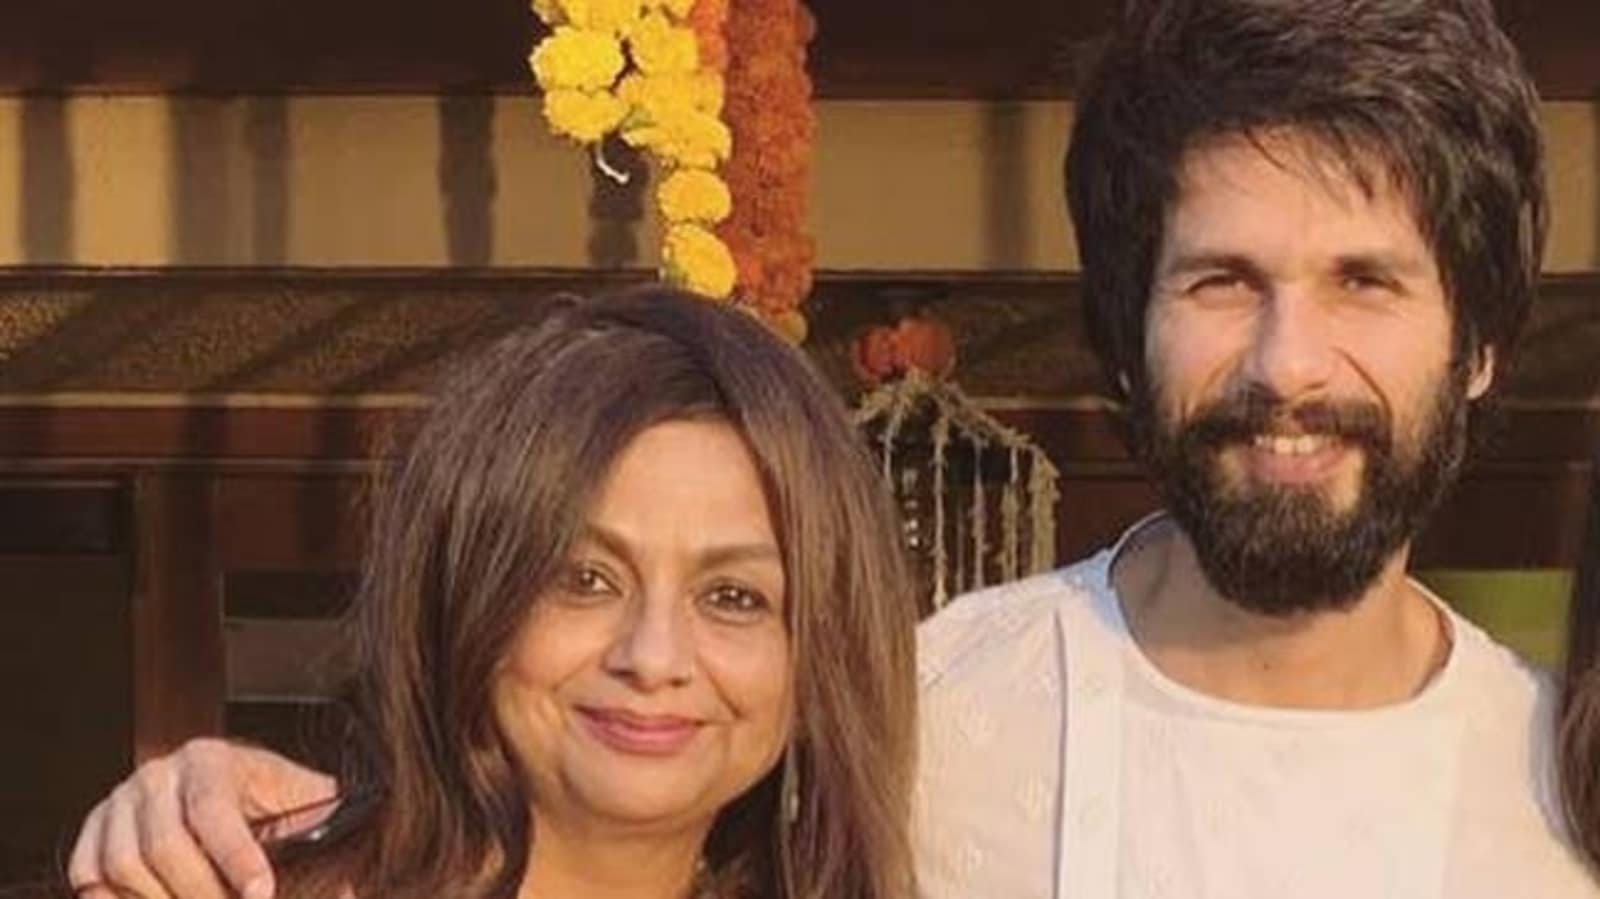 When 6-year-old Shahid Kapoor said ‘you’ll have to deal with me’ to man who asked out Neliima Azeem